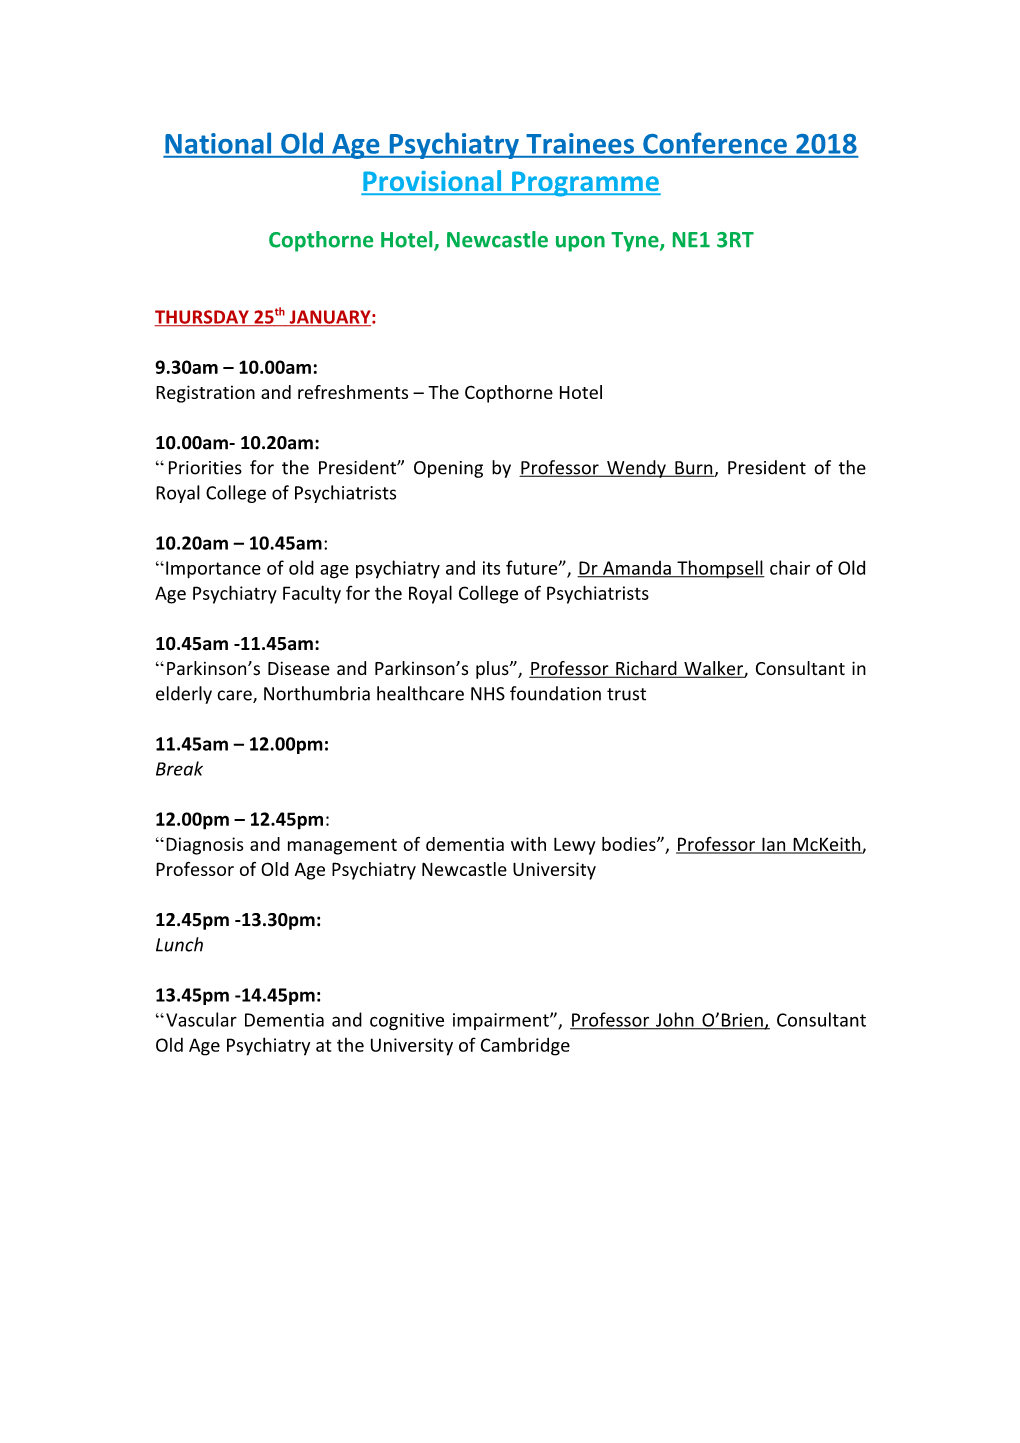 National Old Age Psychiatry Trainees Conference 2018 Provisional Programme